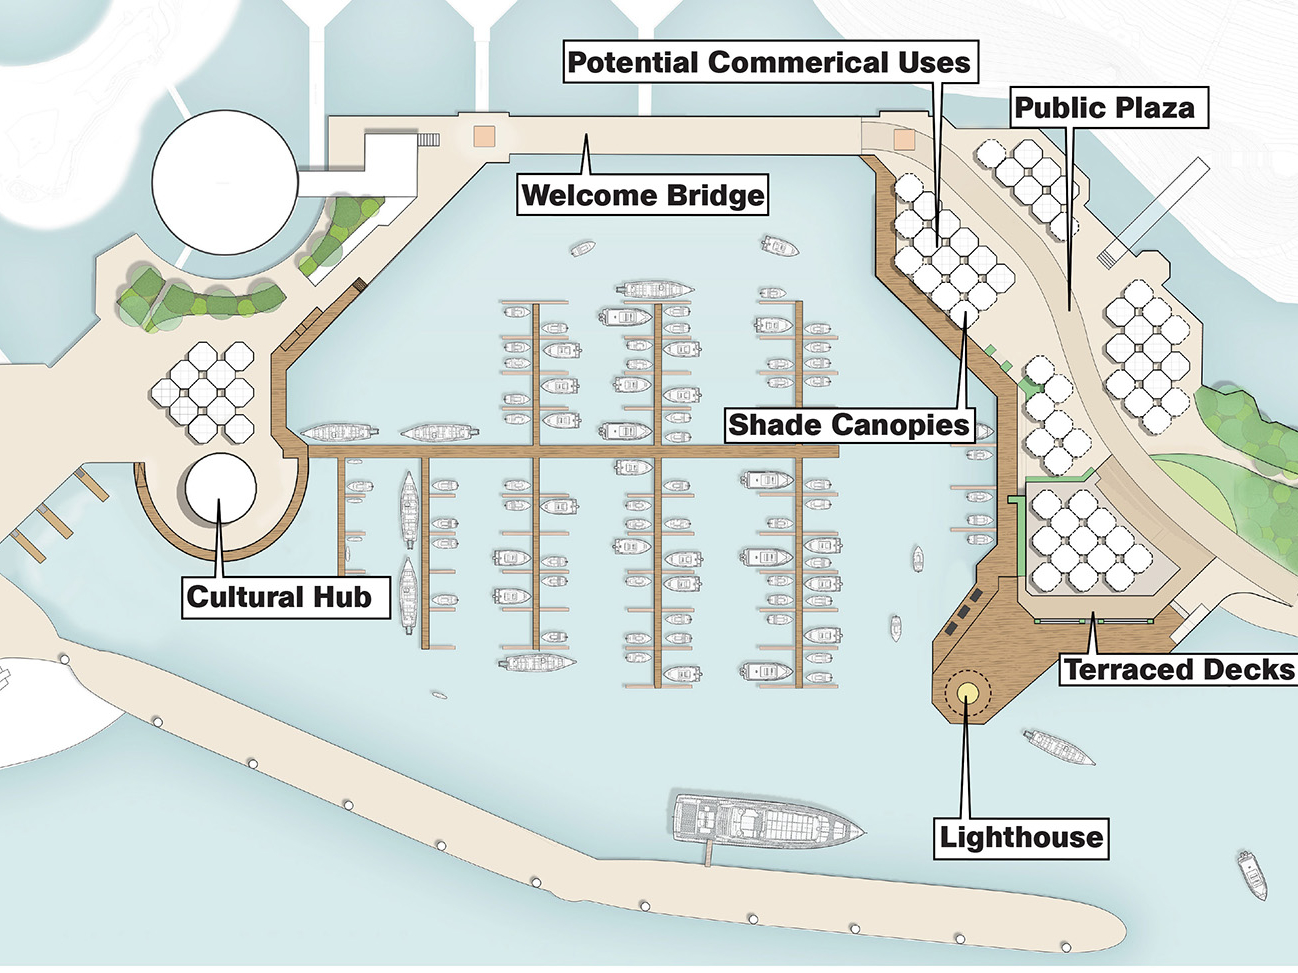 The marina showing a lighthouse, terraced docks, shade canopies, a public plaza, potential commercial uses and a cultural hub. 